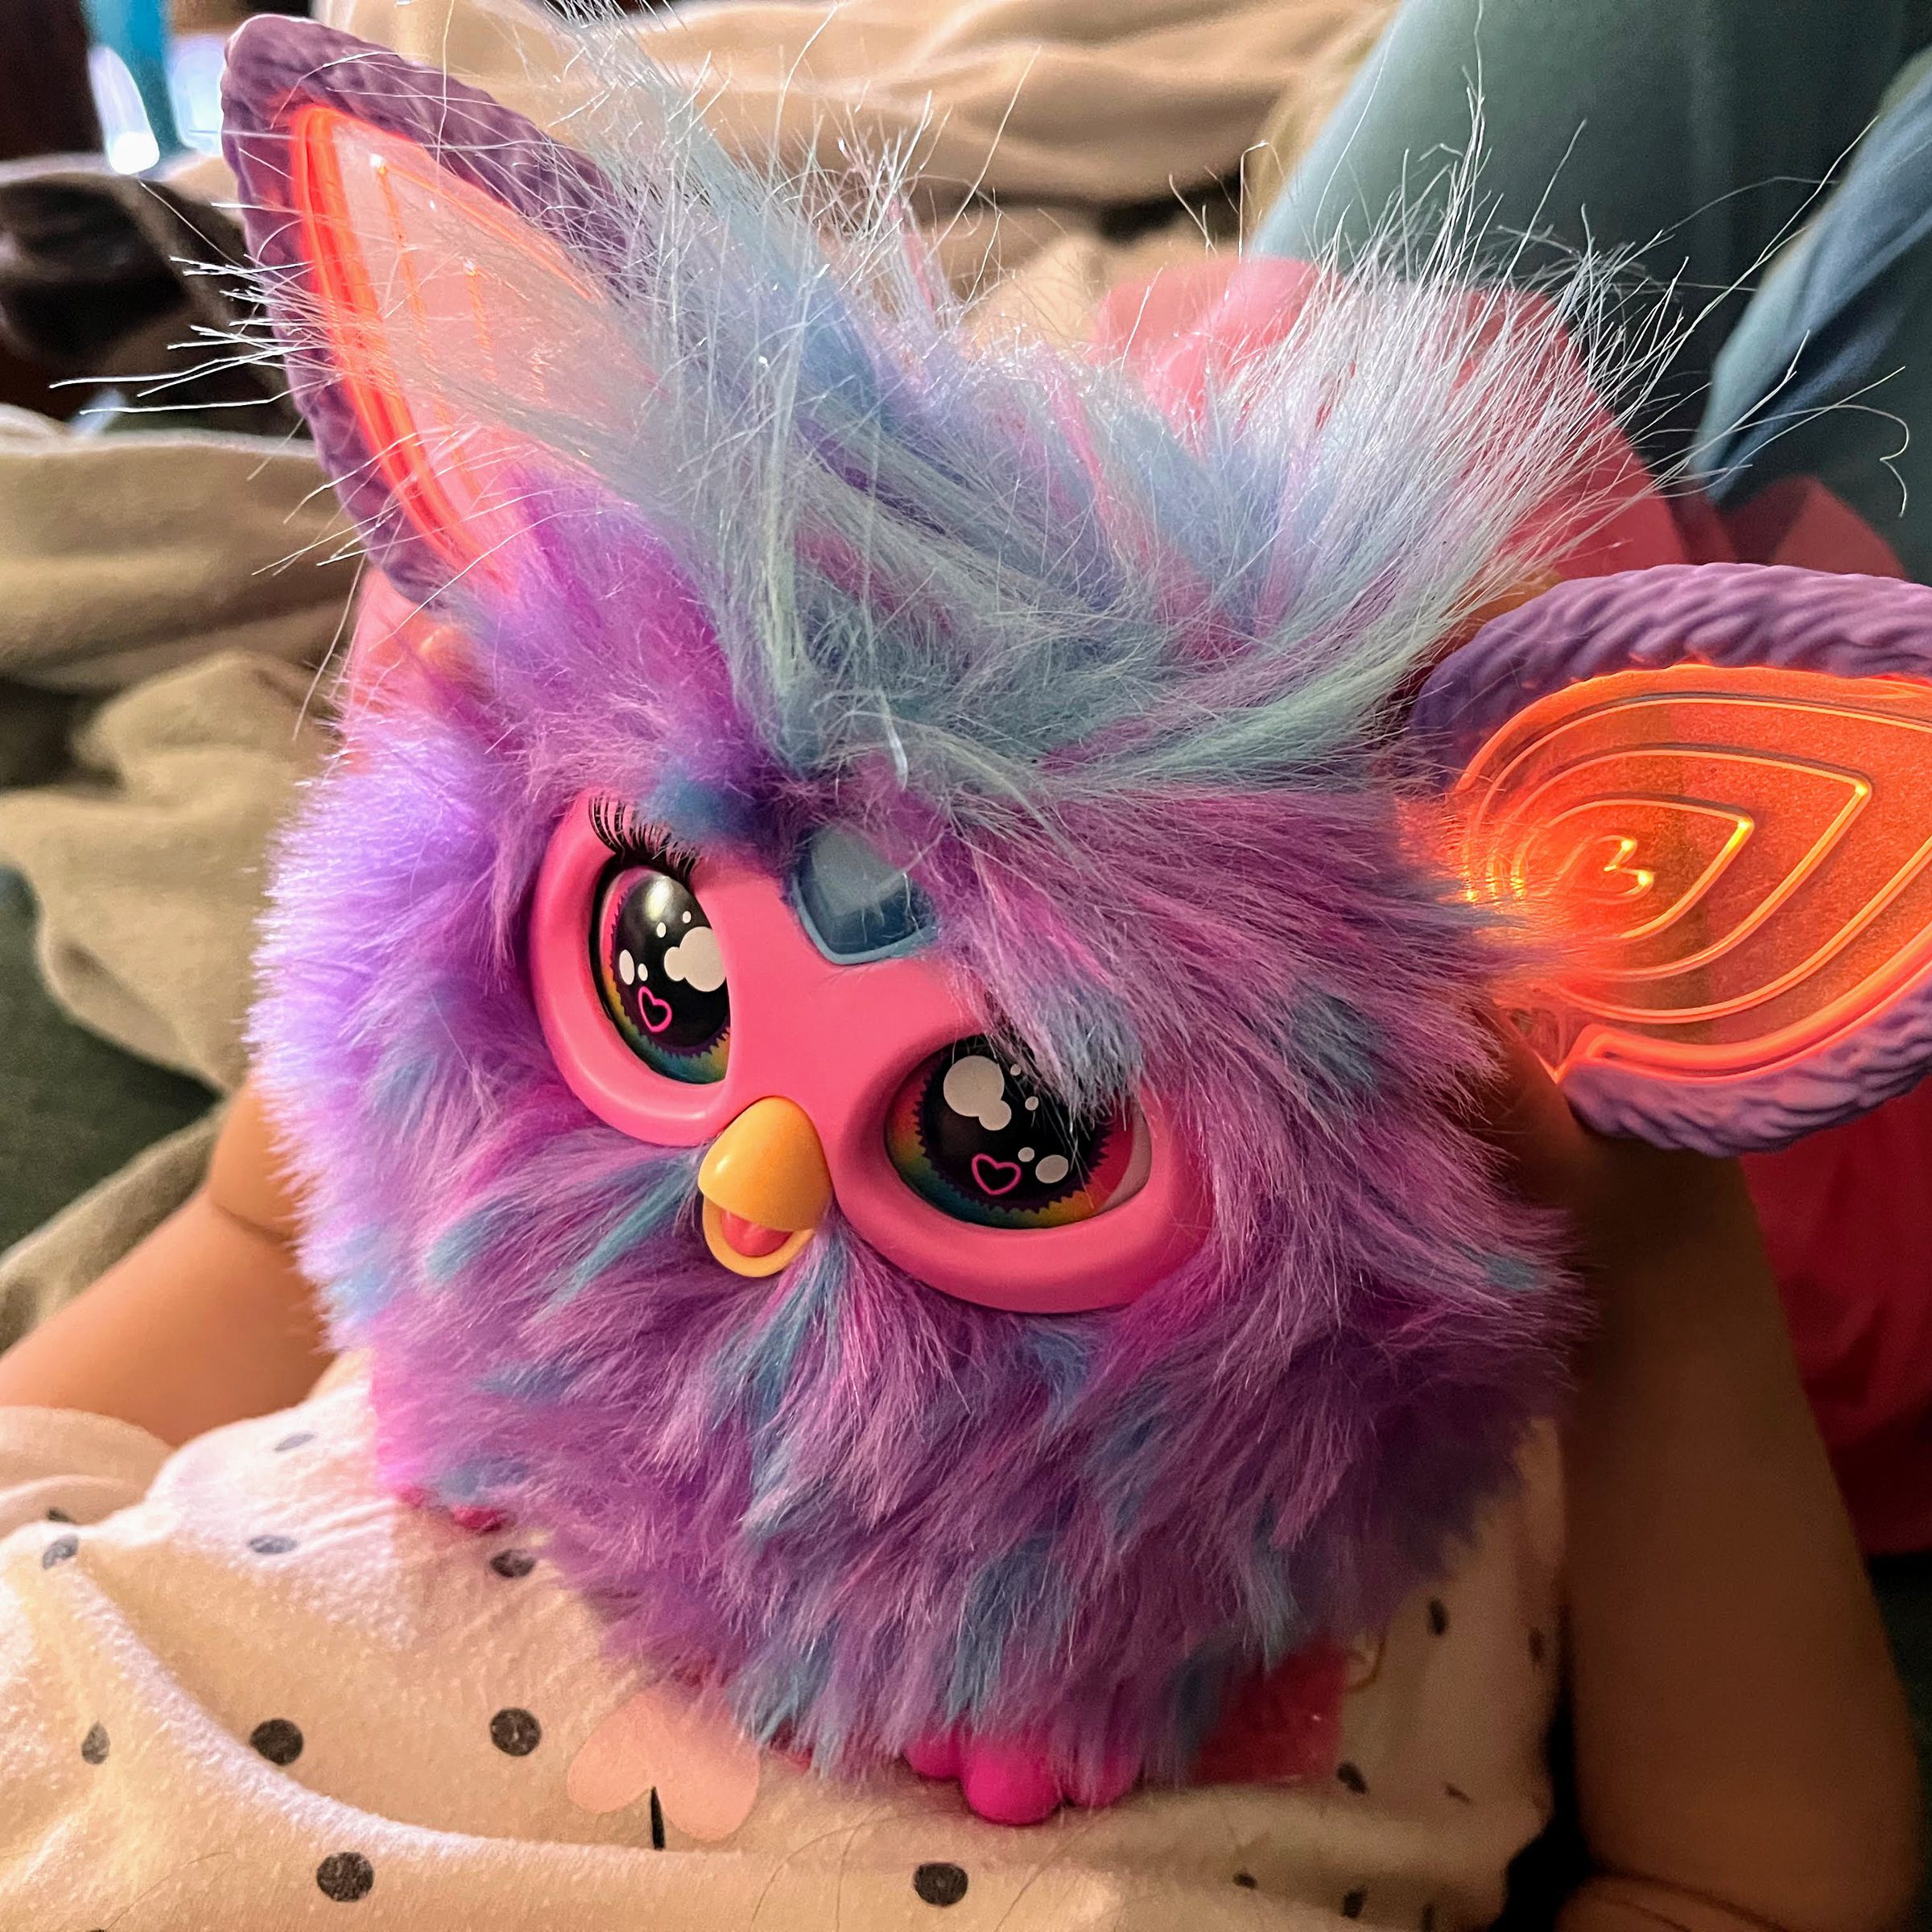 a purple fuzzball of a toy with moving eyes and ears lit by RGB LEDs and a heart button on its forehead